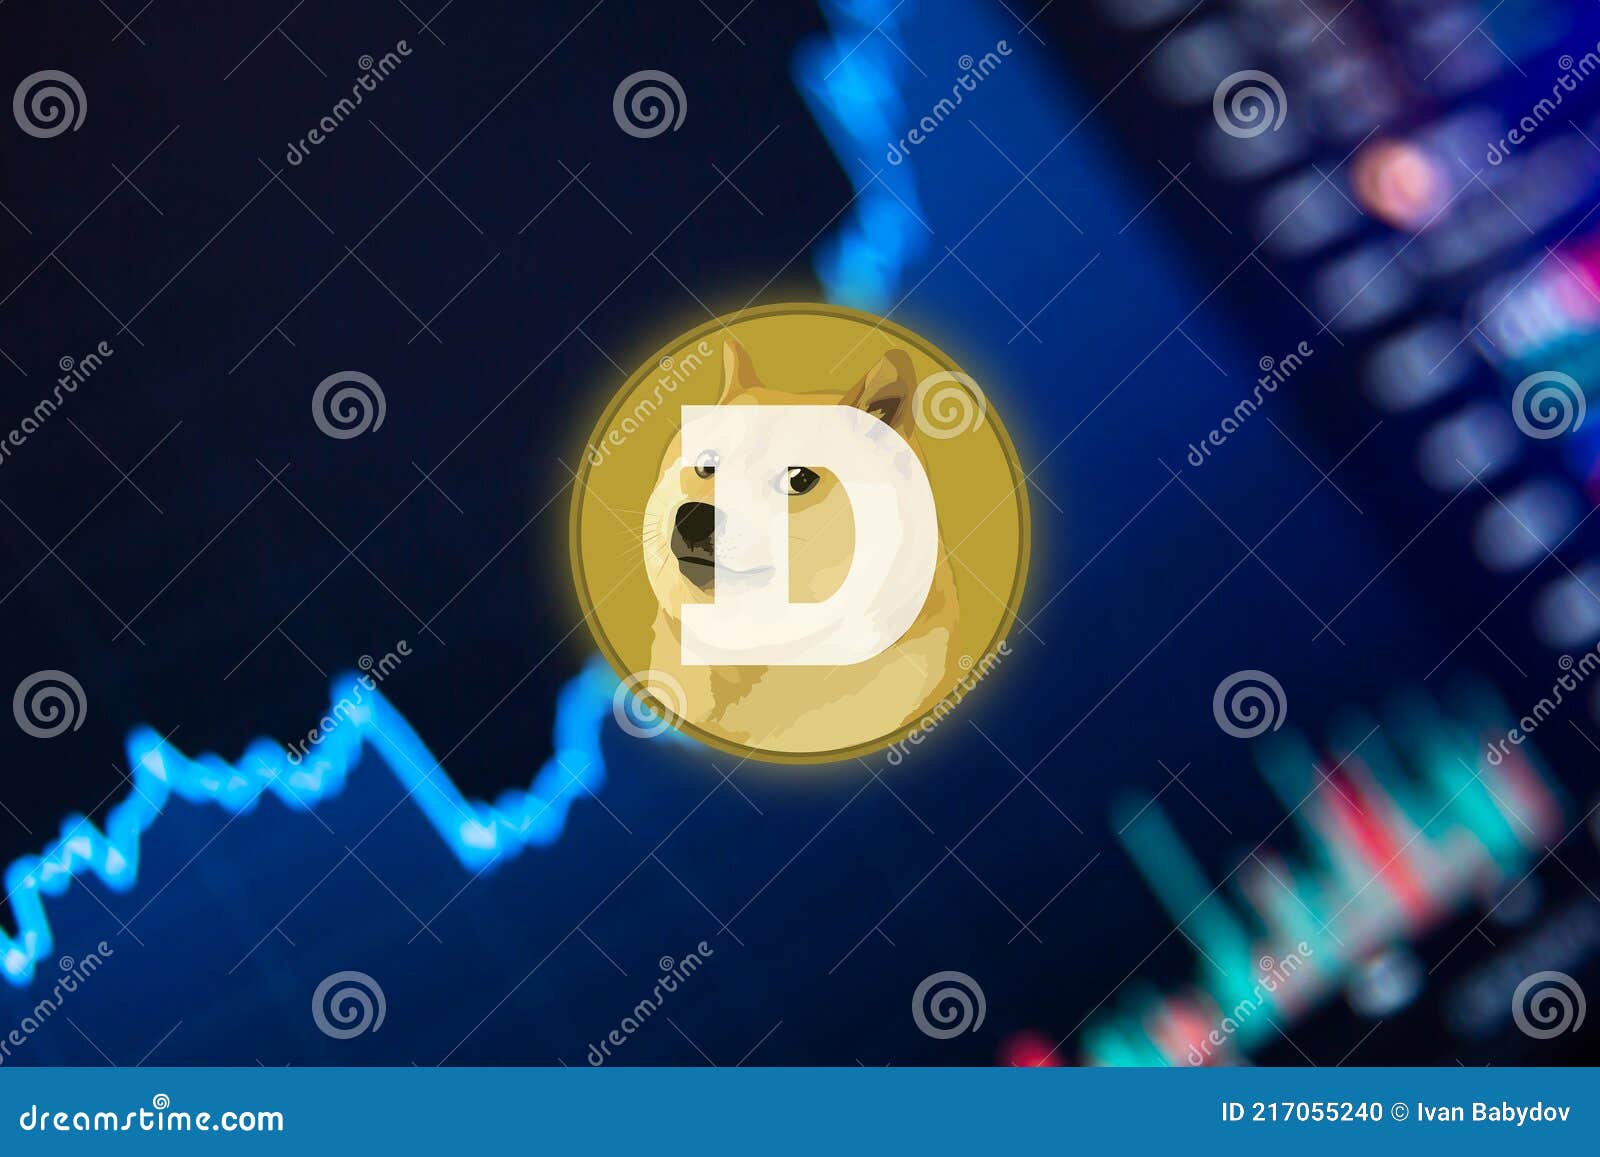 cryptocurrency trading dogecoin